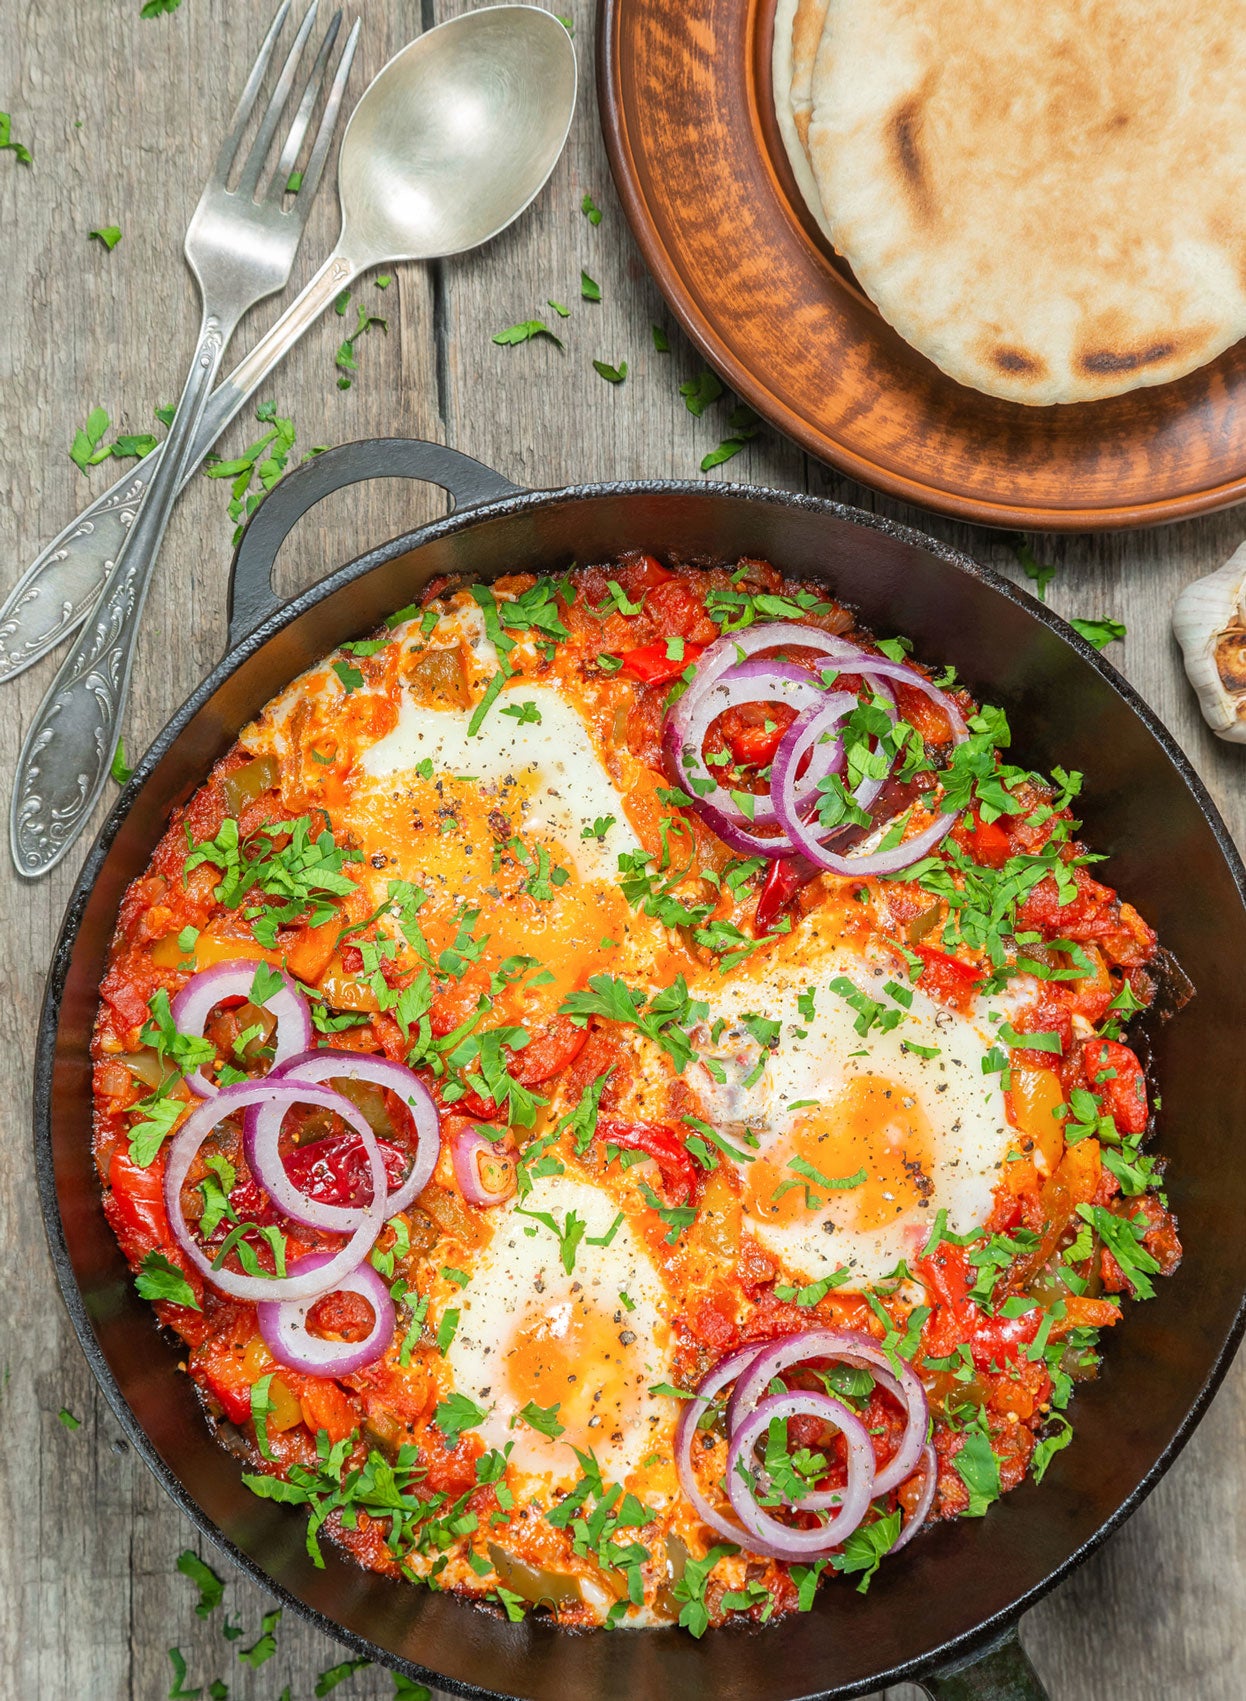 Gorgeous shakshuka made with our Mango hot sauce as the secret ingredient.